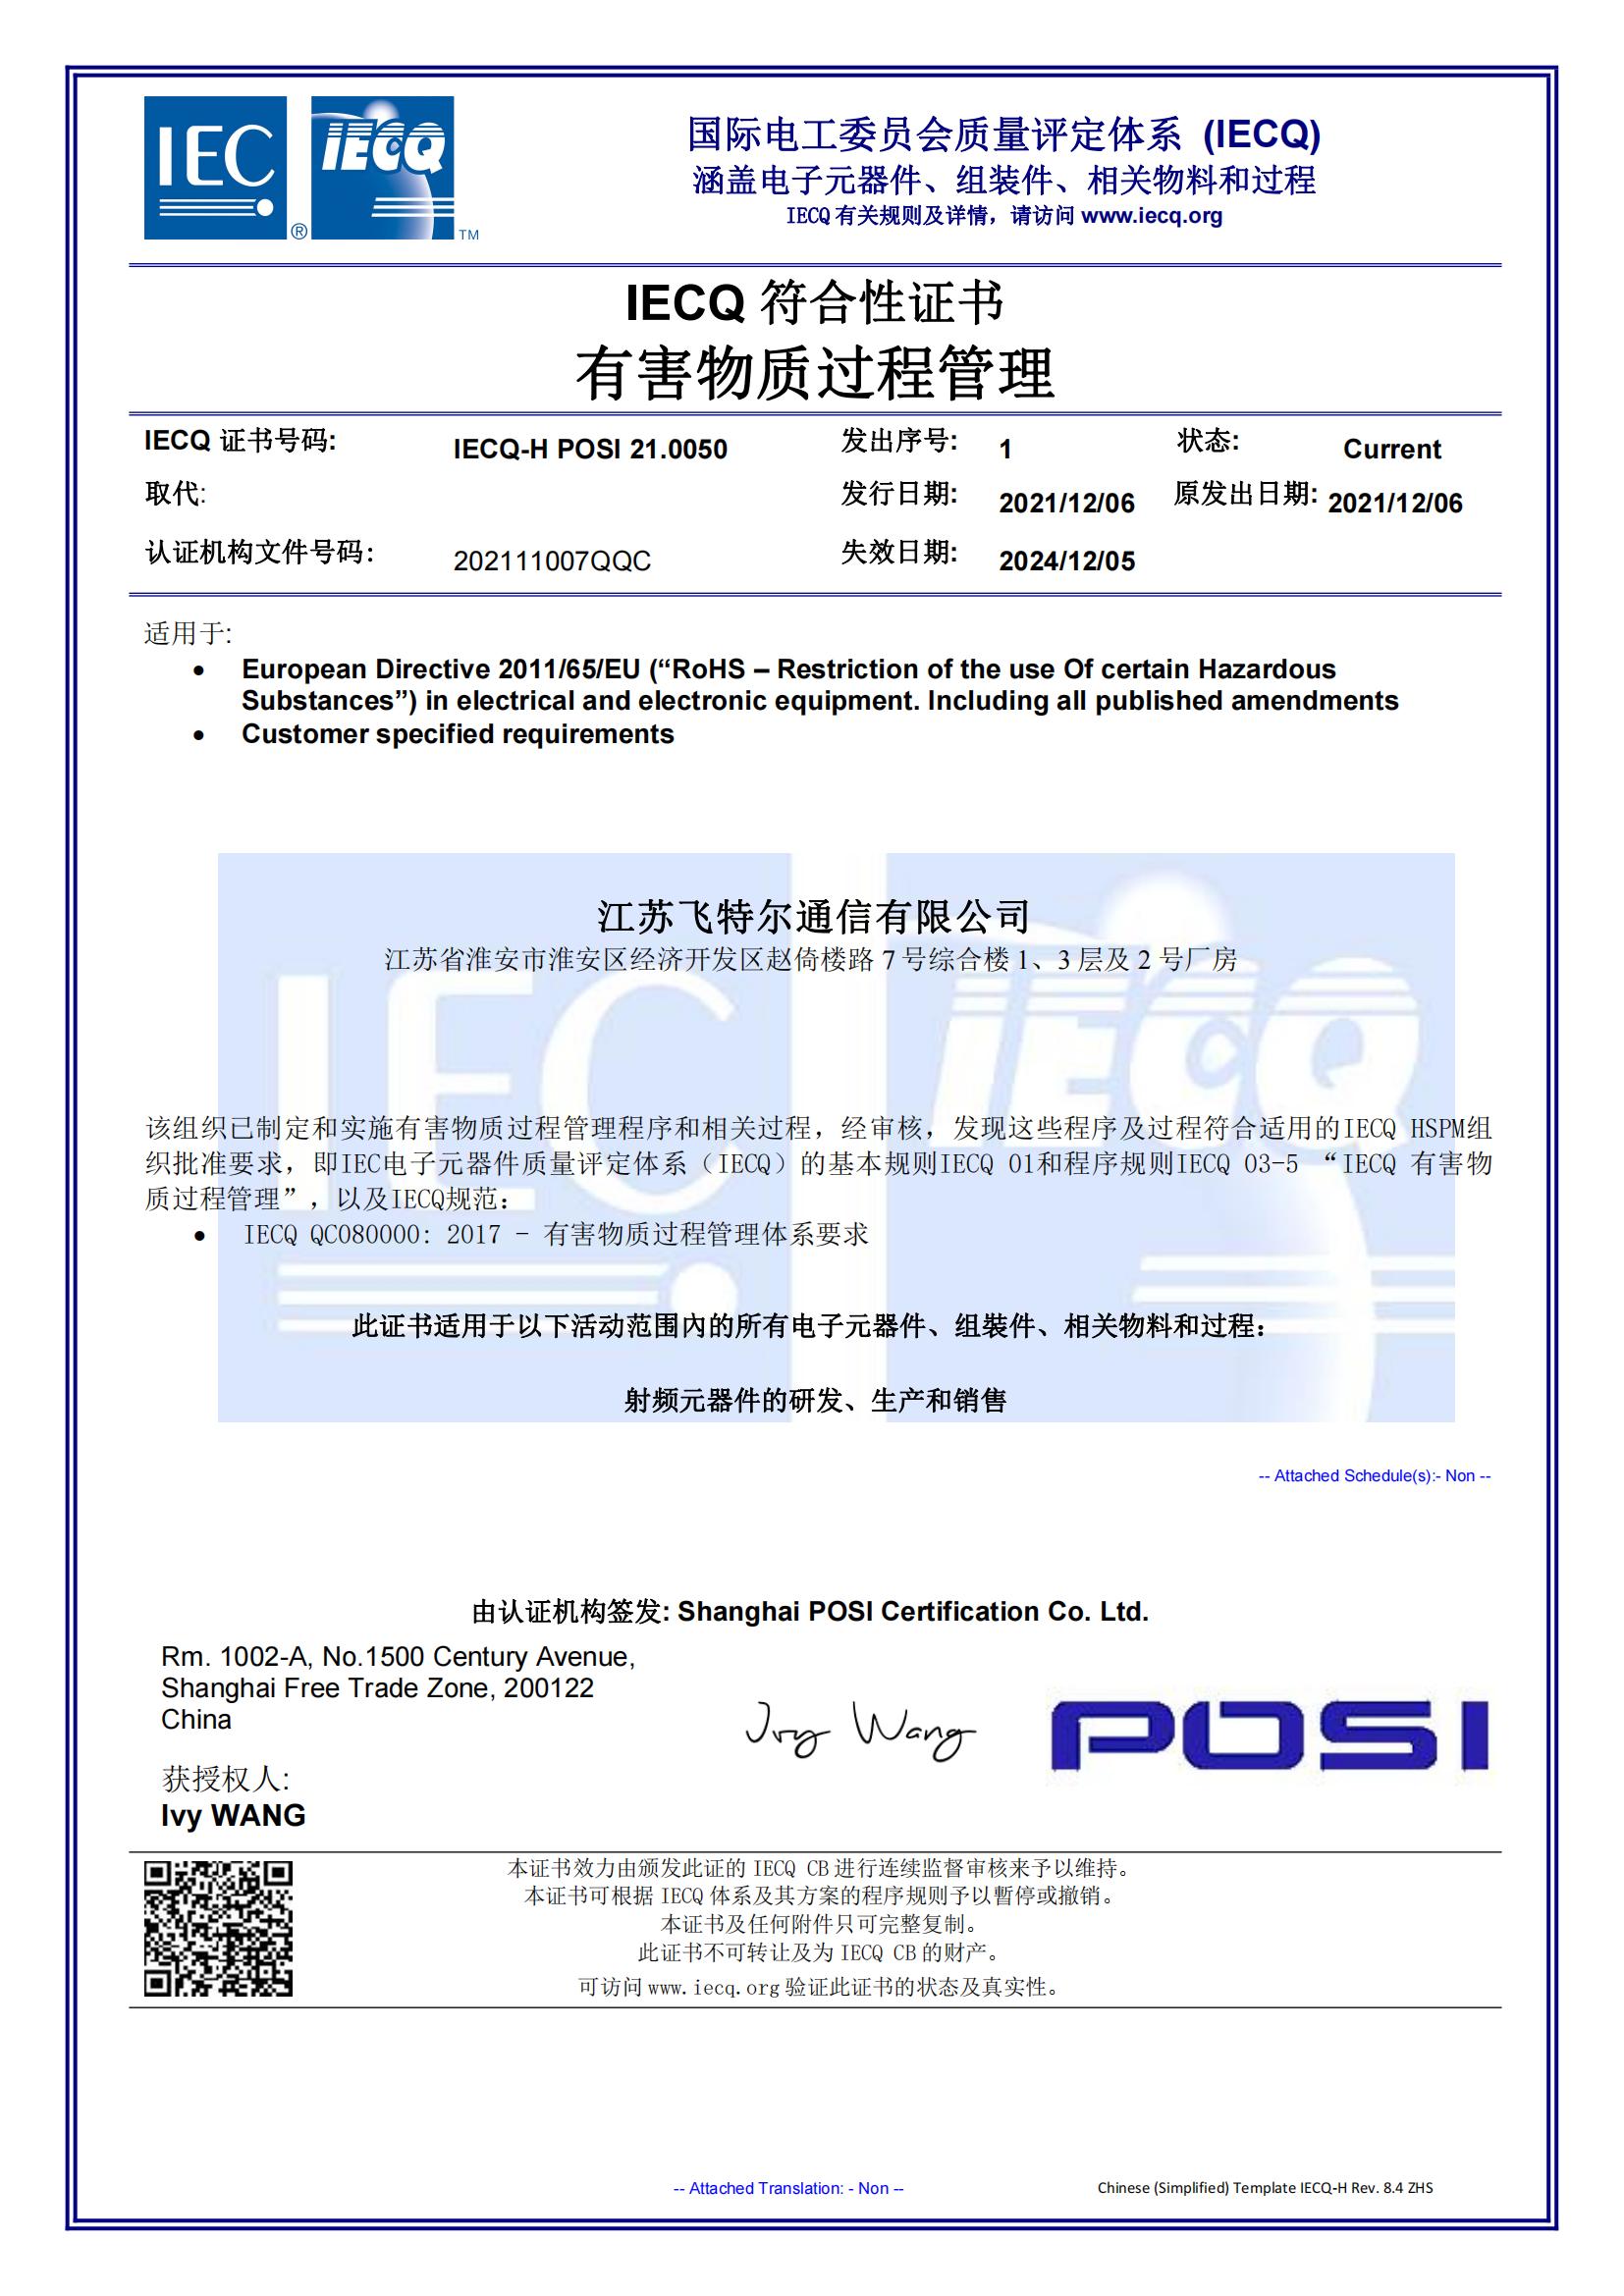 Our company has passed the IECQ QC080000 certification